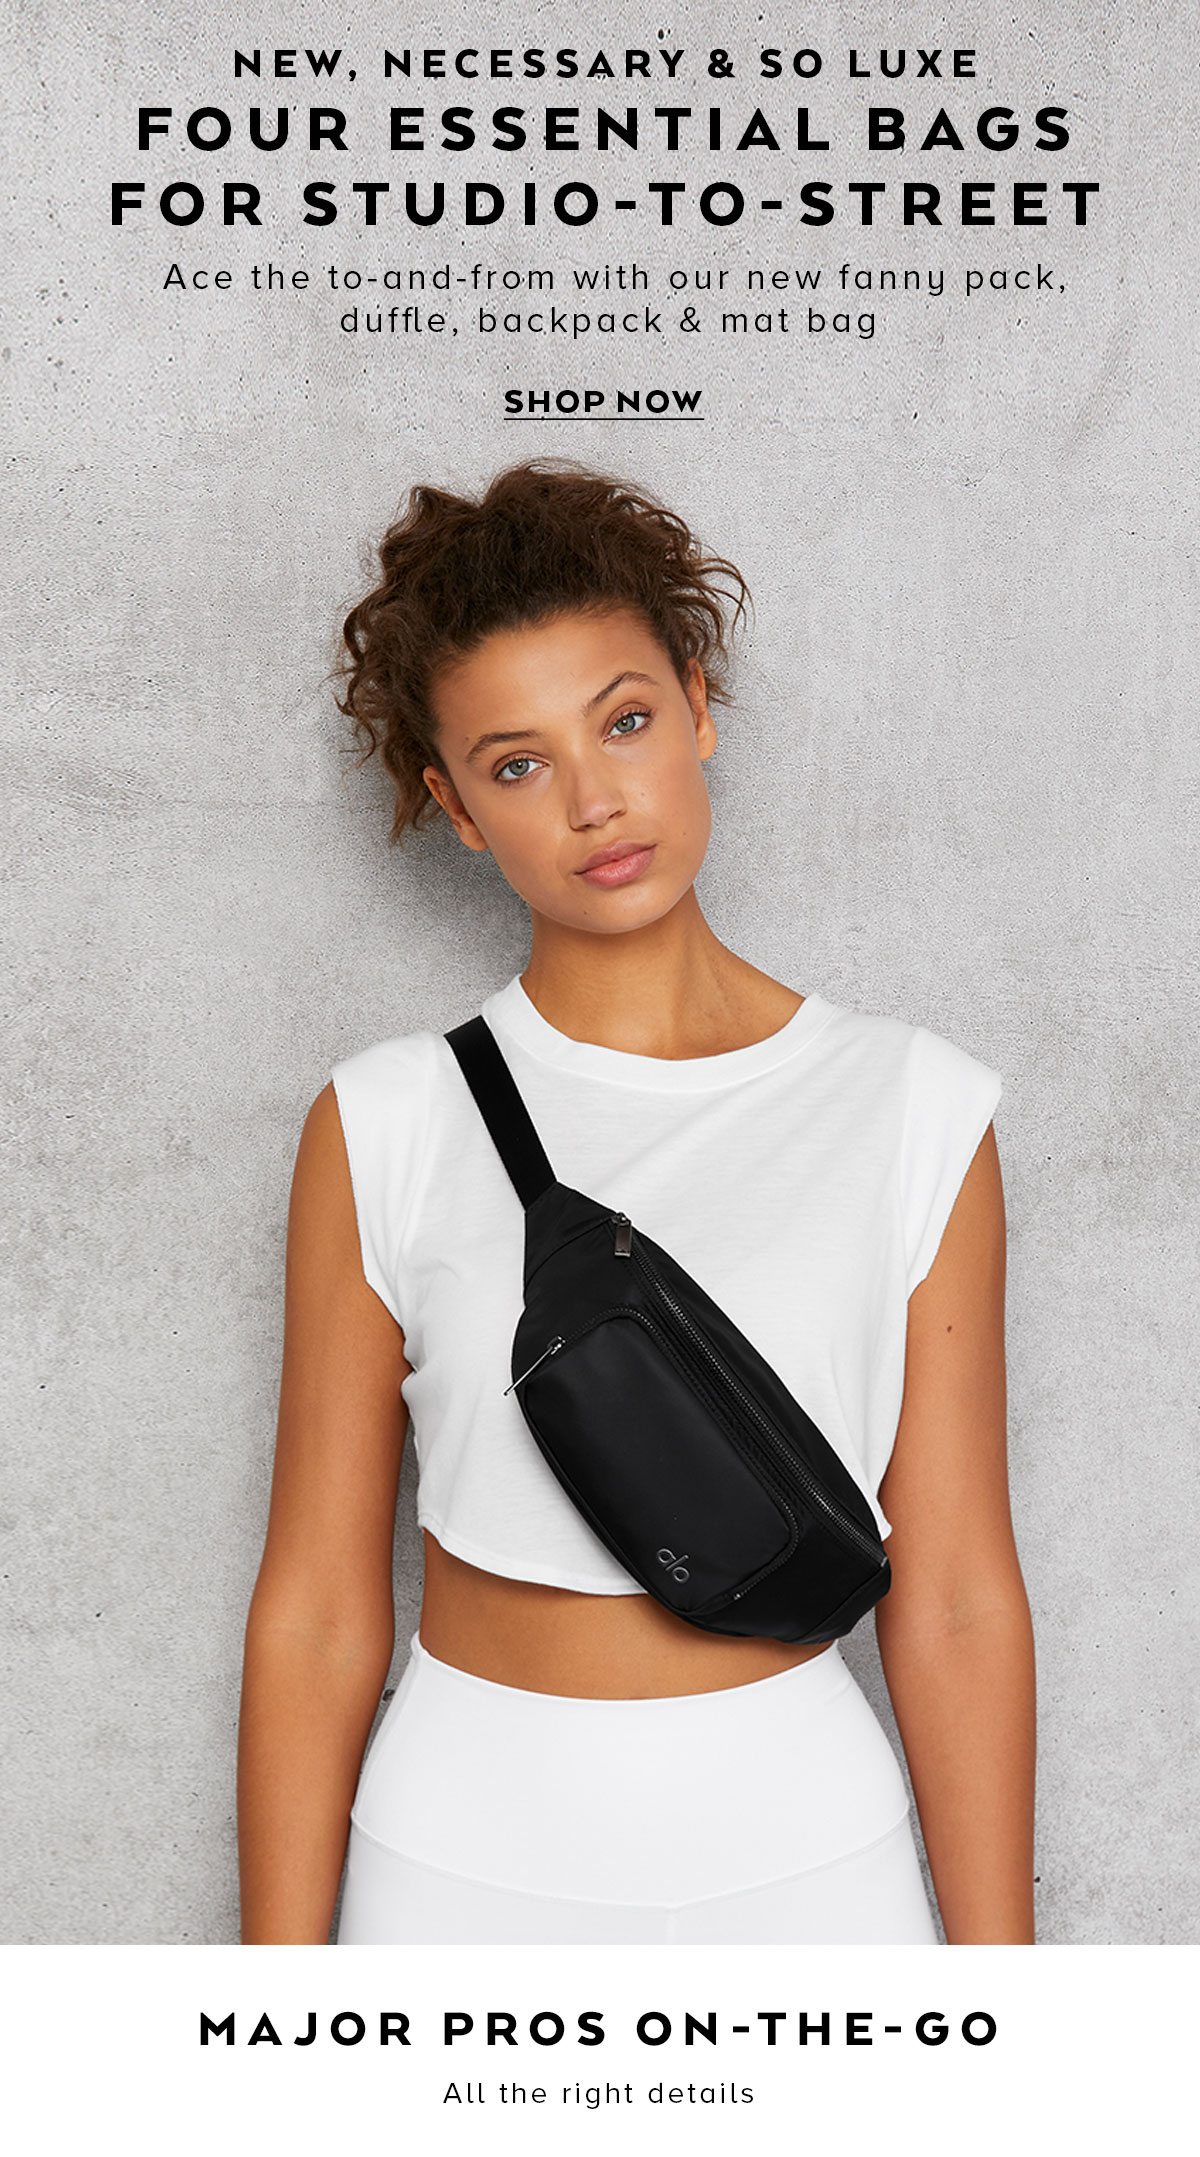 Epic News! 4 Necessary Bags to Elevate Your To-and-From - Alo Yoga Email  Archive